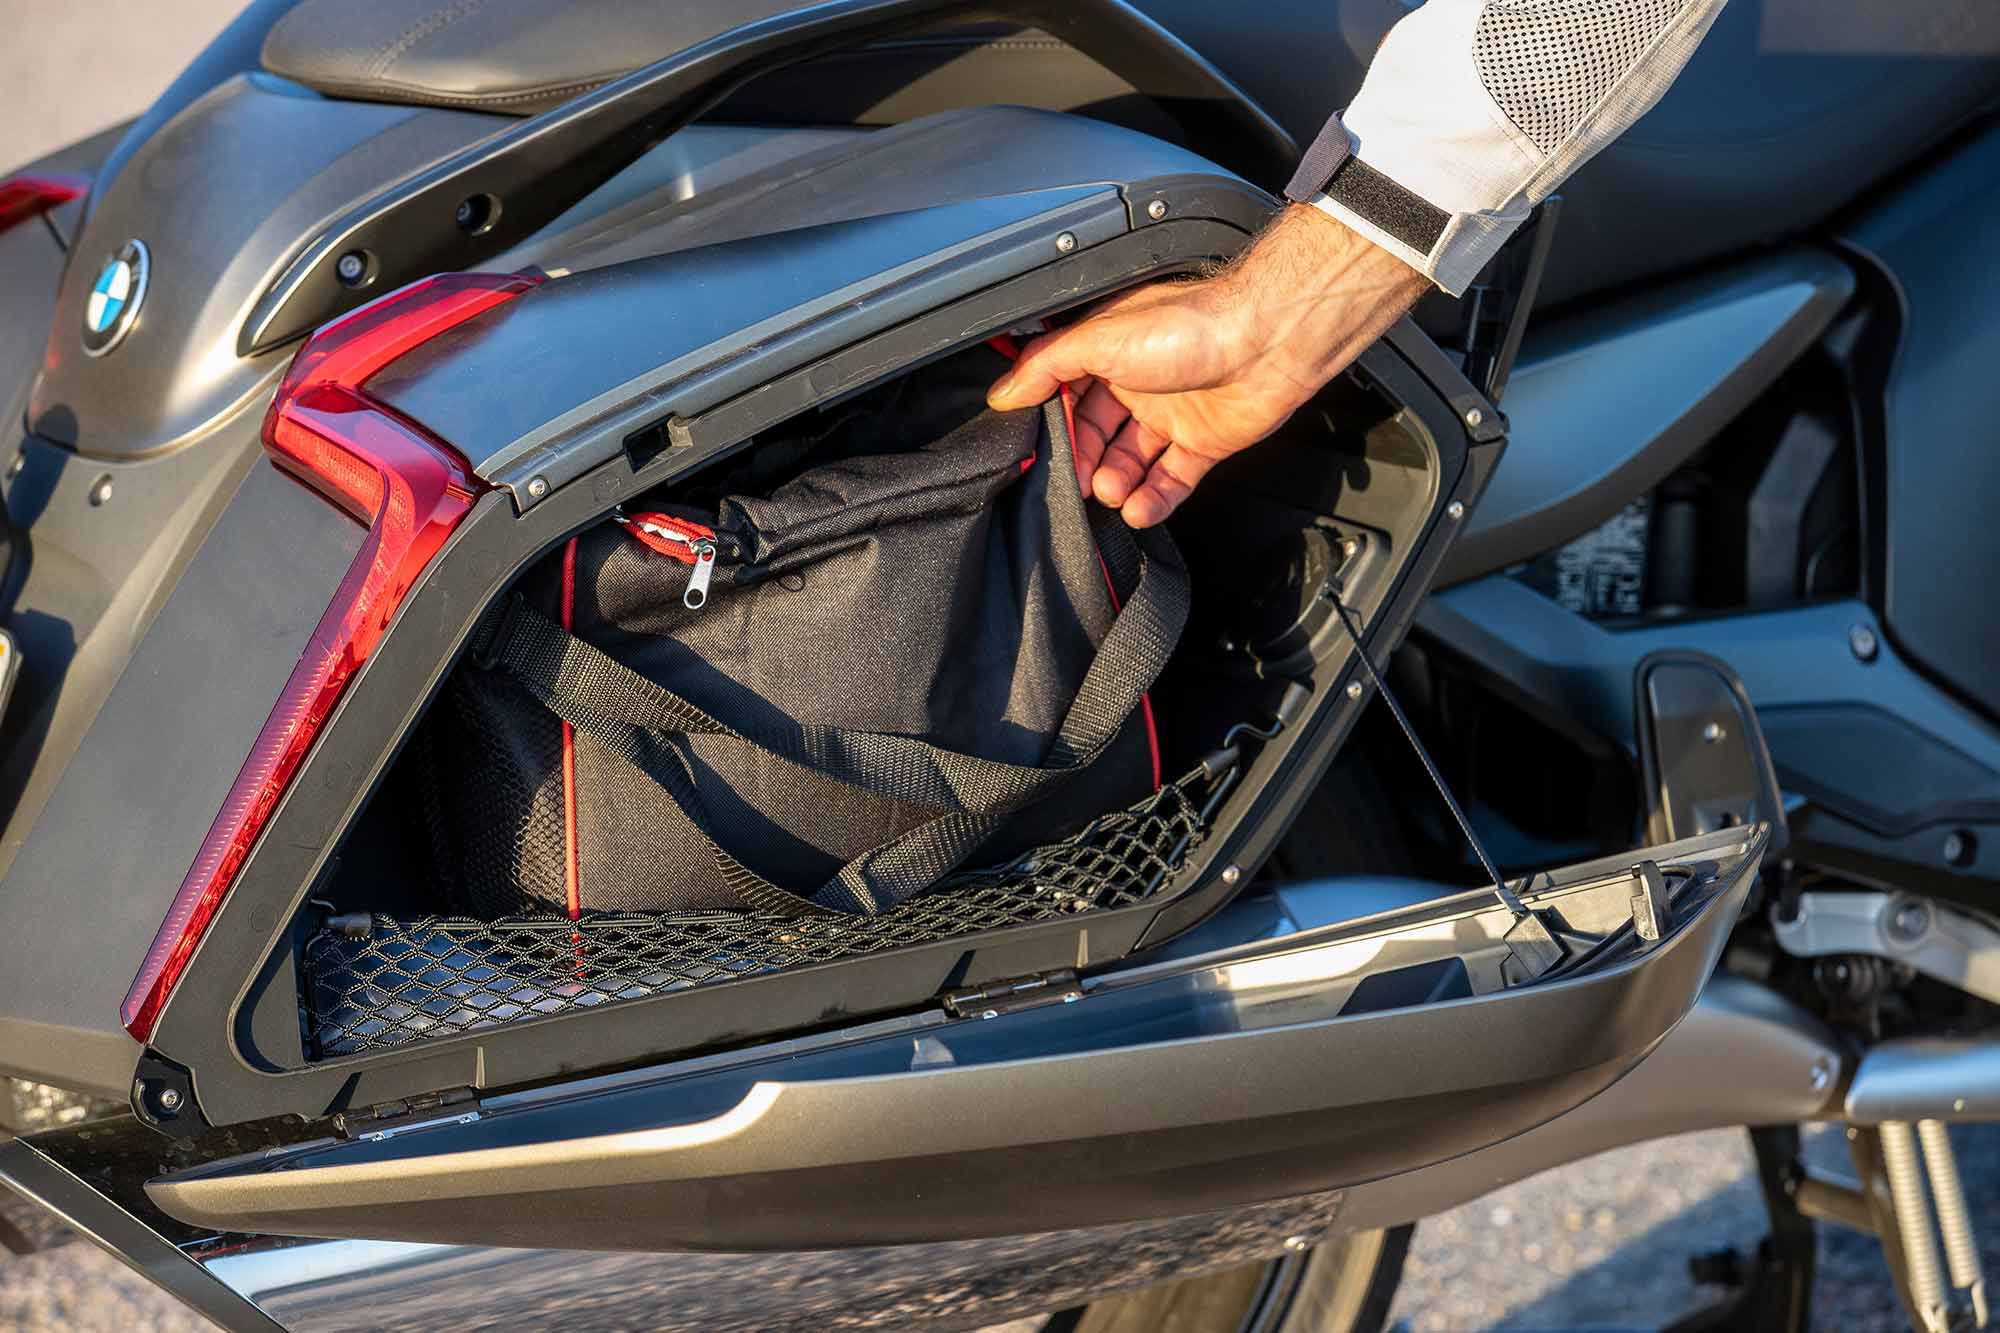 Each lockable hard case is capable of swallowing nearly 9 gallons of cargo. The optional electronic central locking feature is another handy touch.